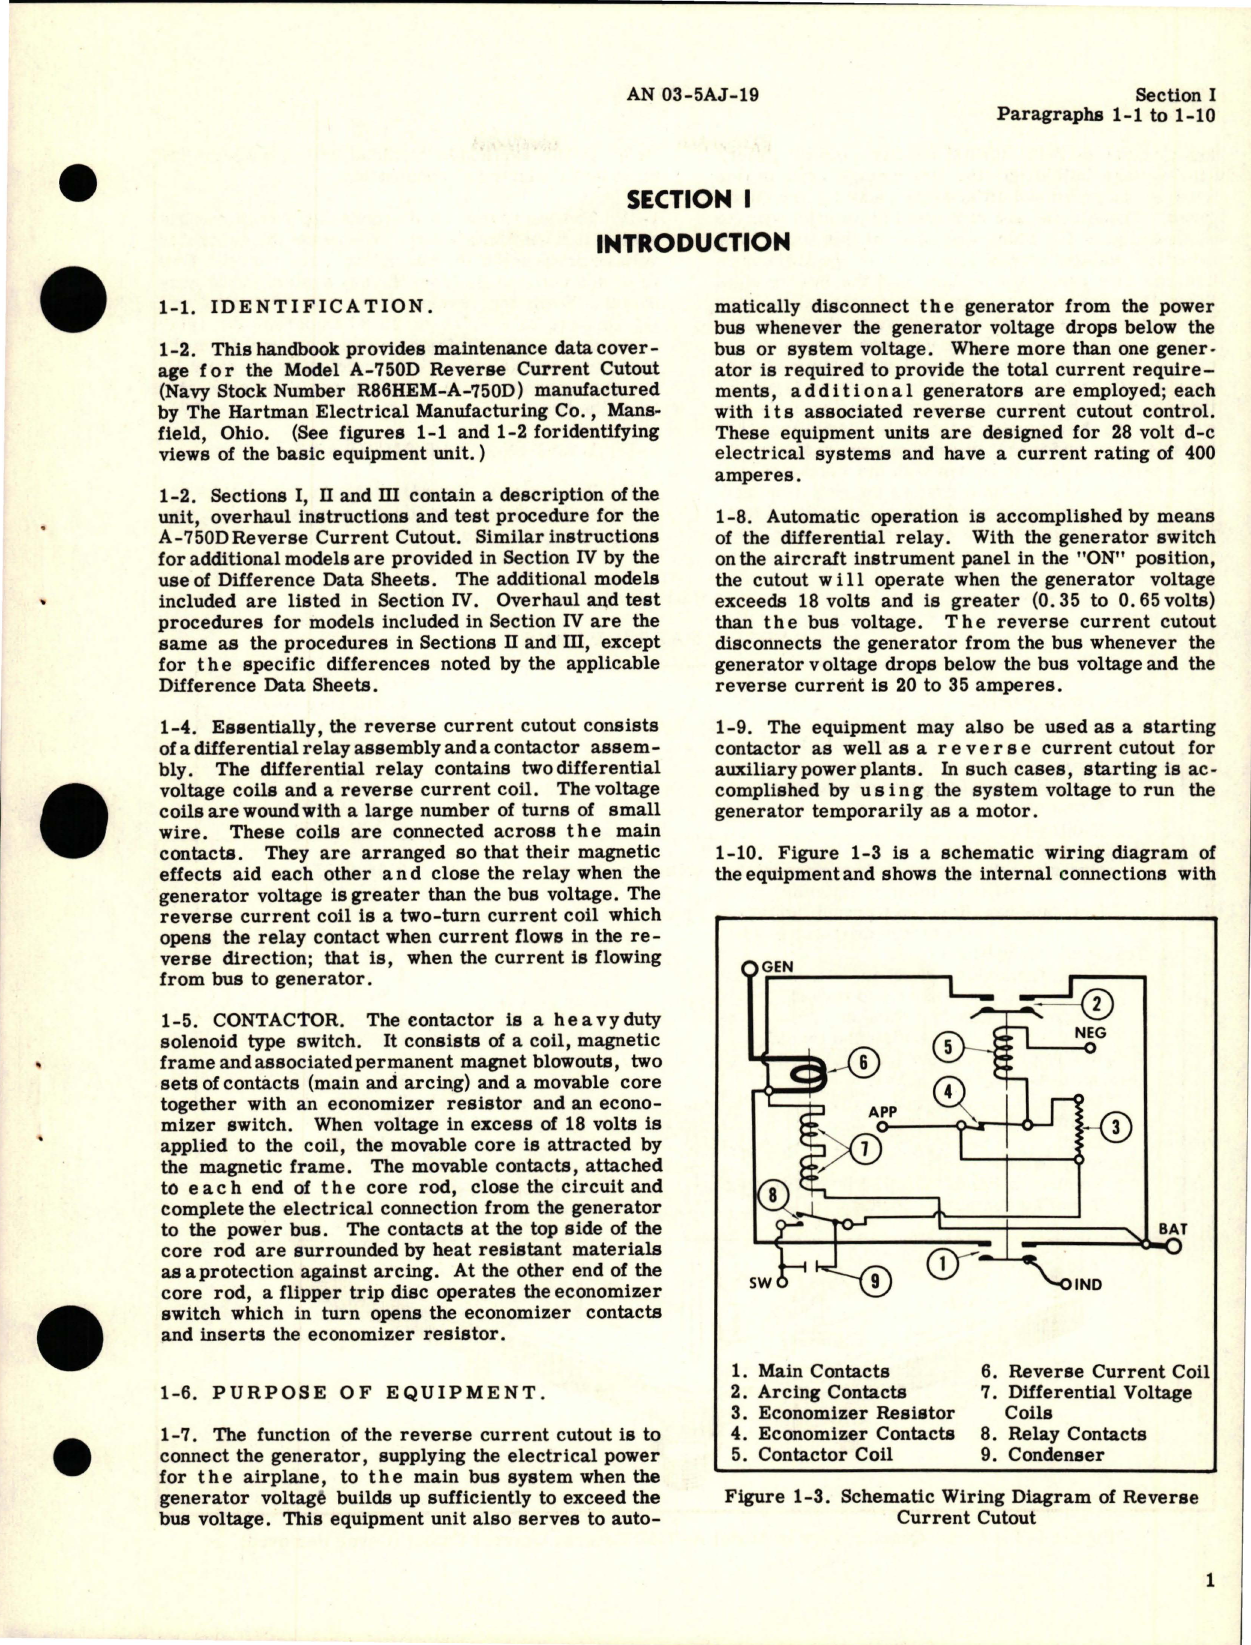 Sample page 5 from AirCorps Library document: Overhaul Instructions for Reverse Current Cutout - Model A-750D, Contractors - Models A-751D and A-751E